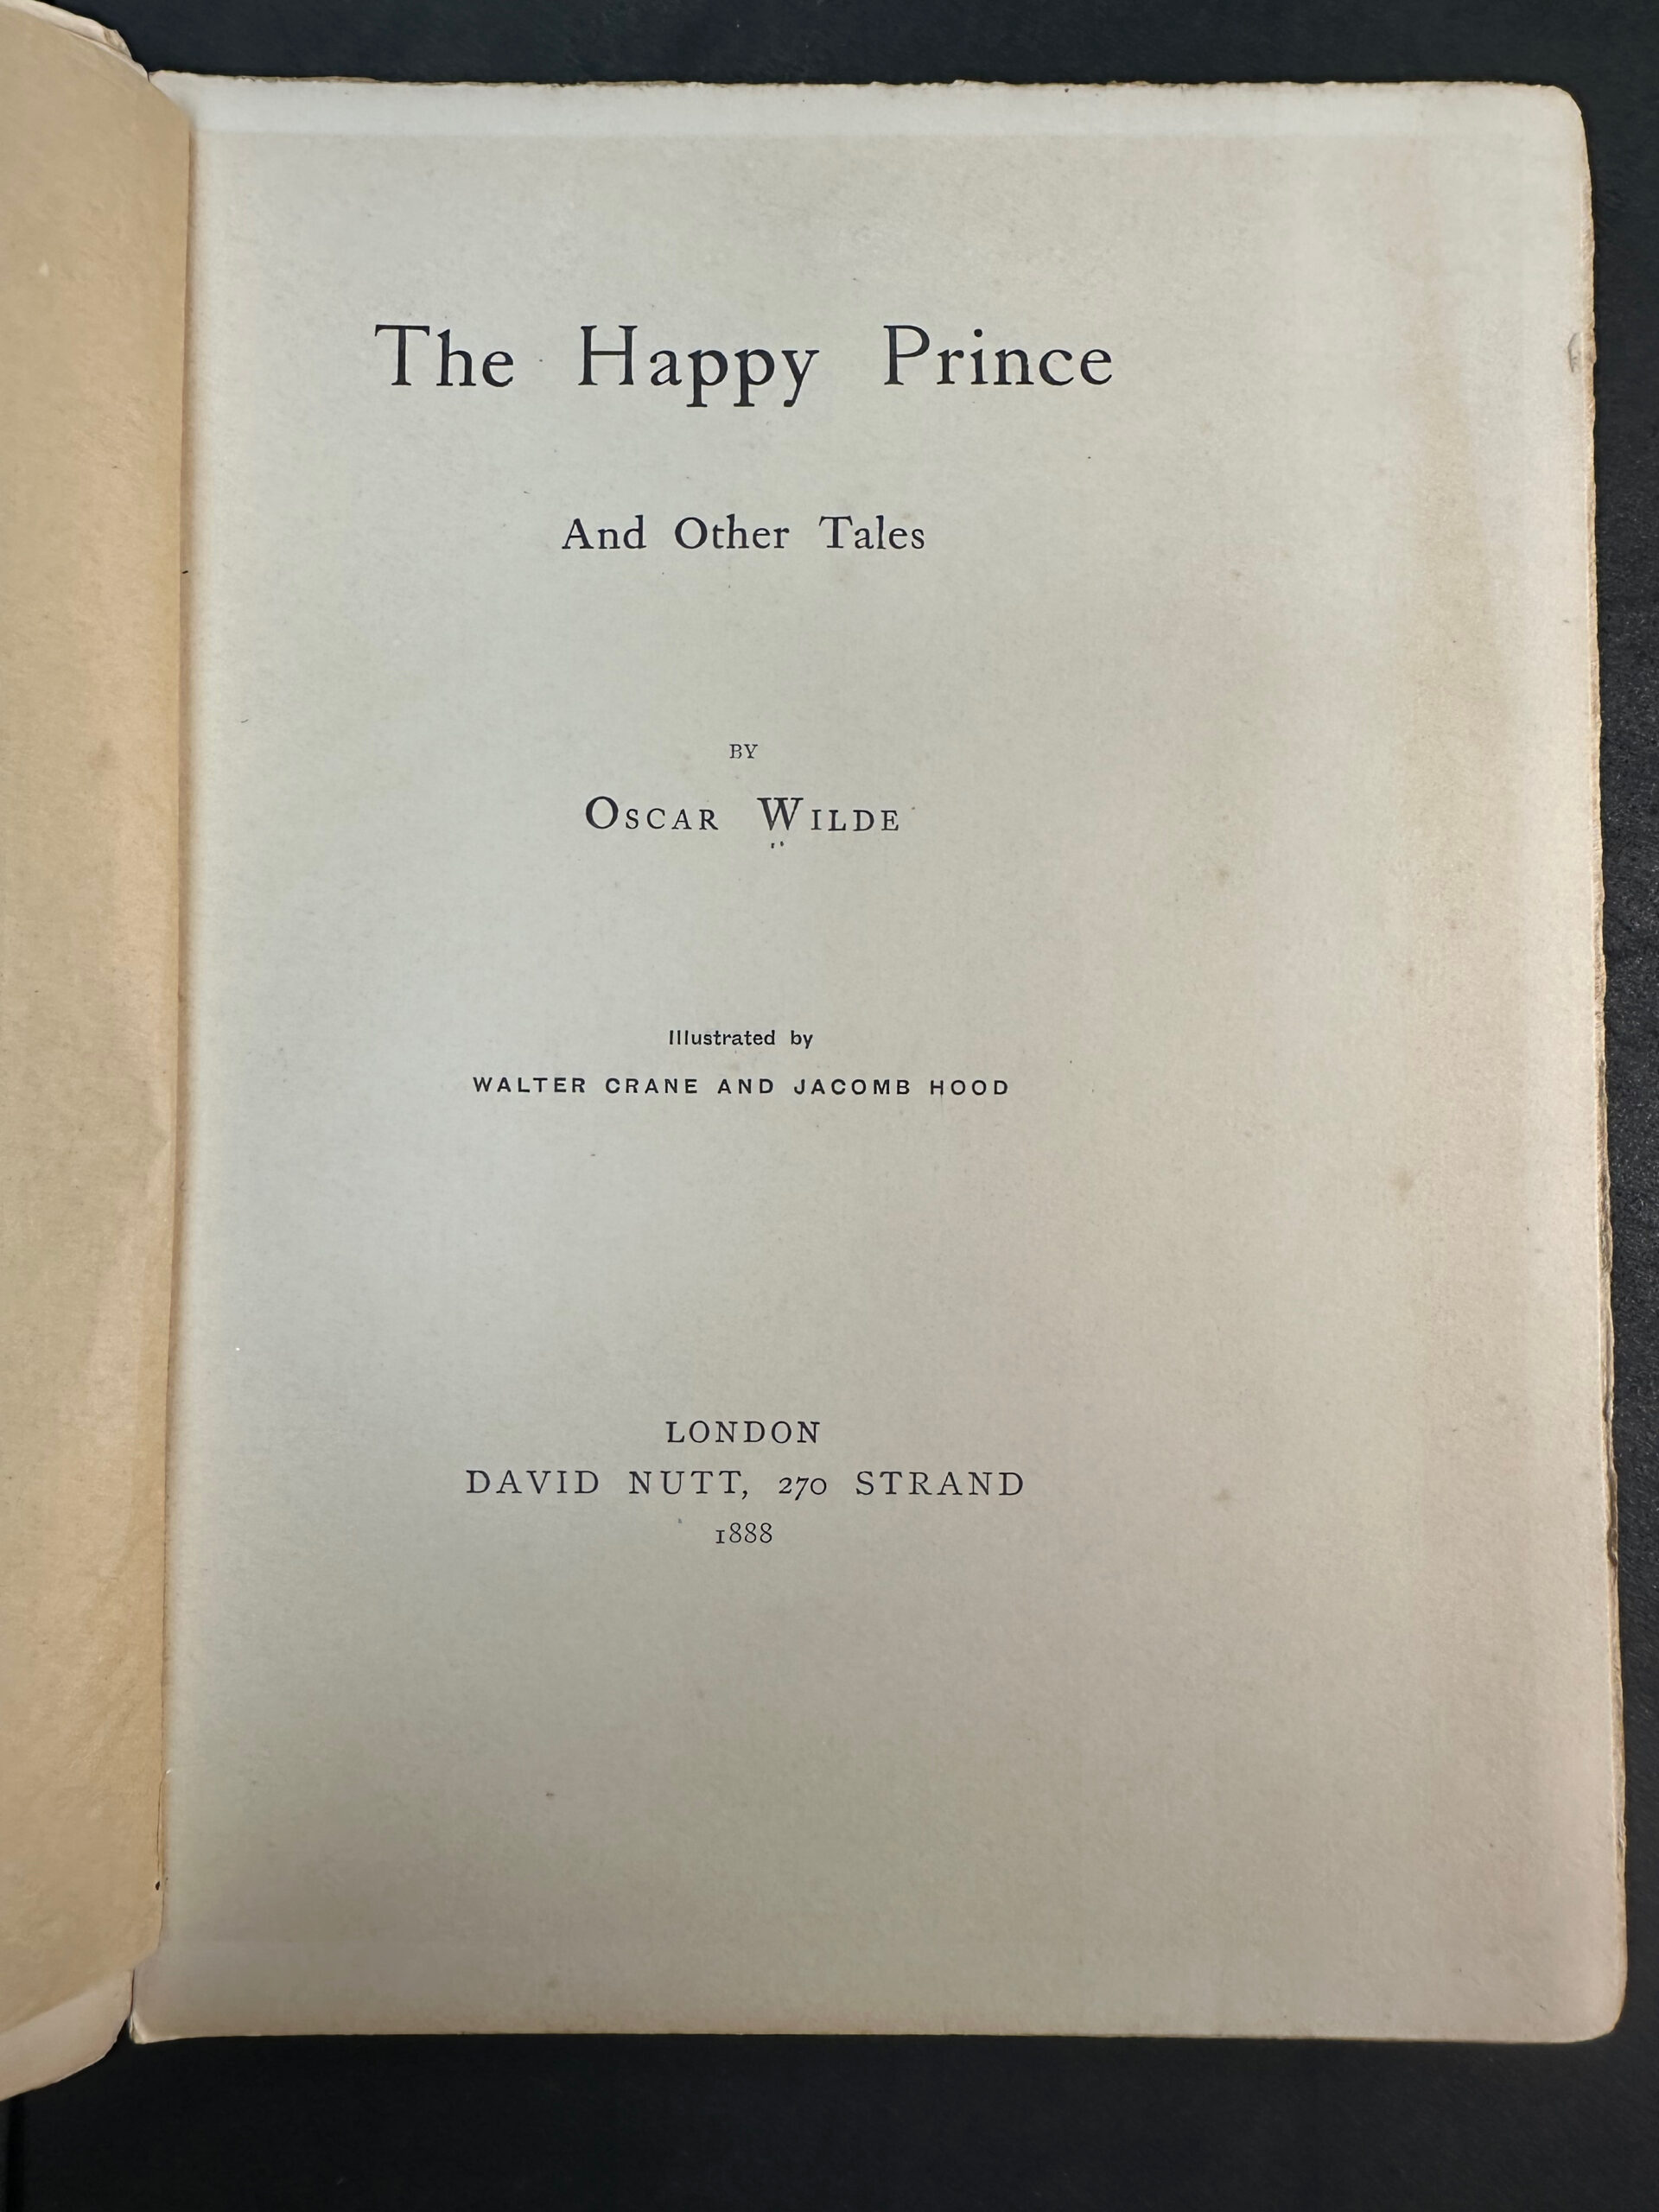 The Happy Prince and Other Tales, 1888, PR5818 .H251 *